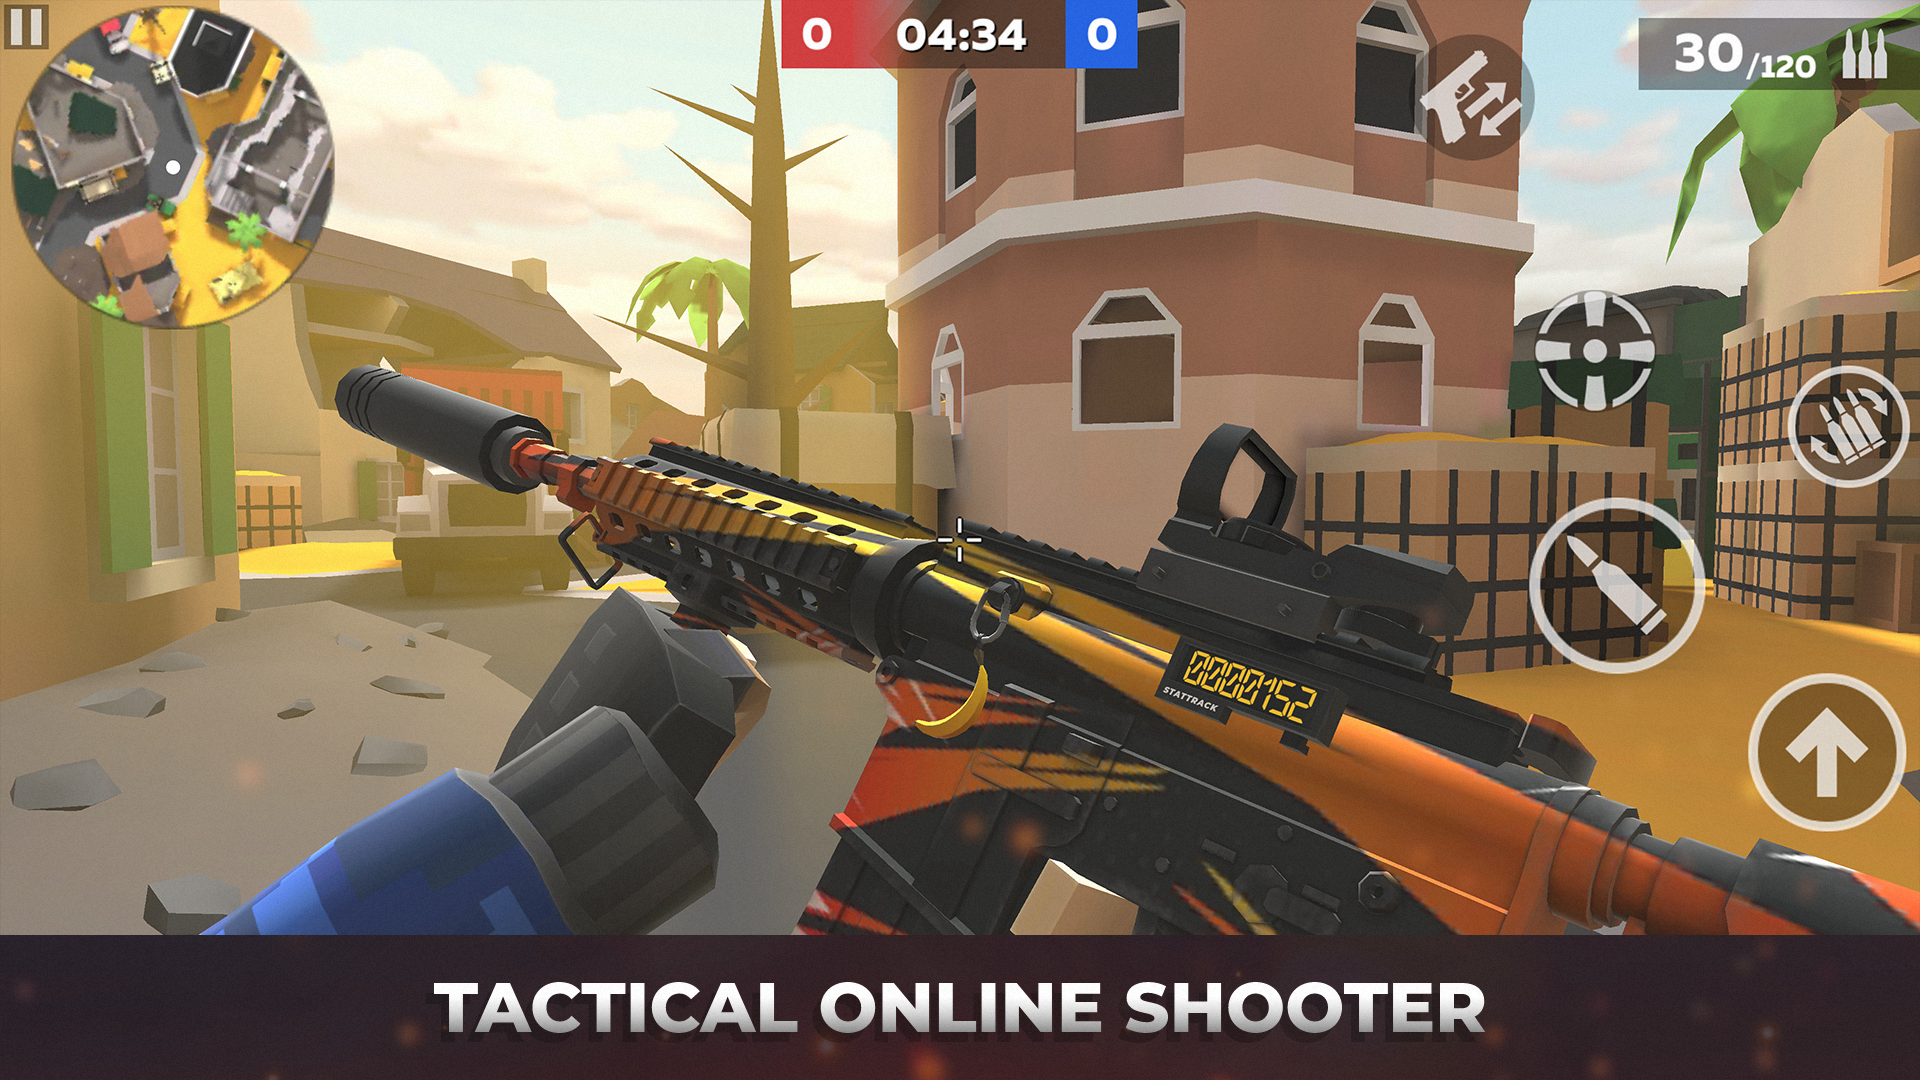 Download and play POLYWAR FPS online shooter on PC with MuMu Player